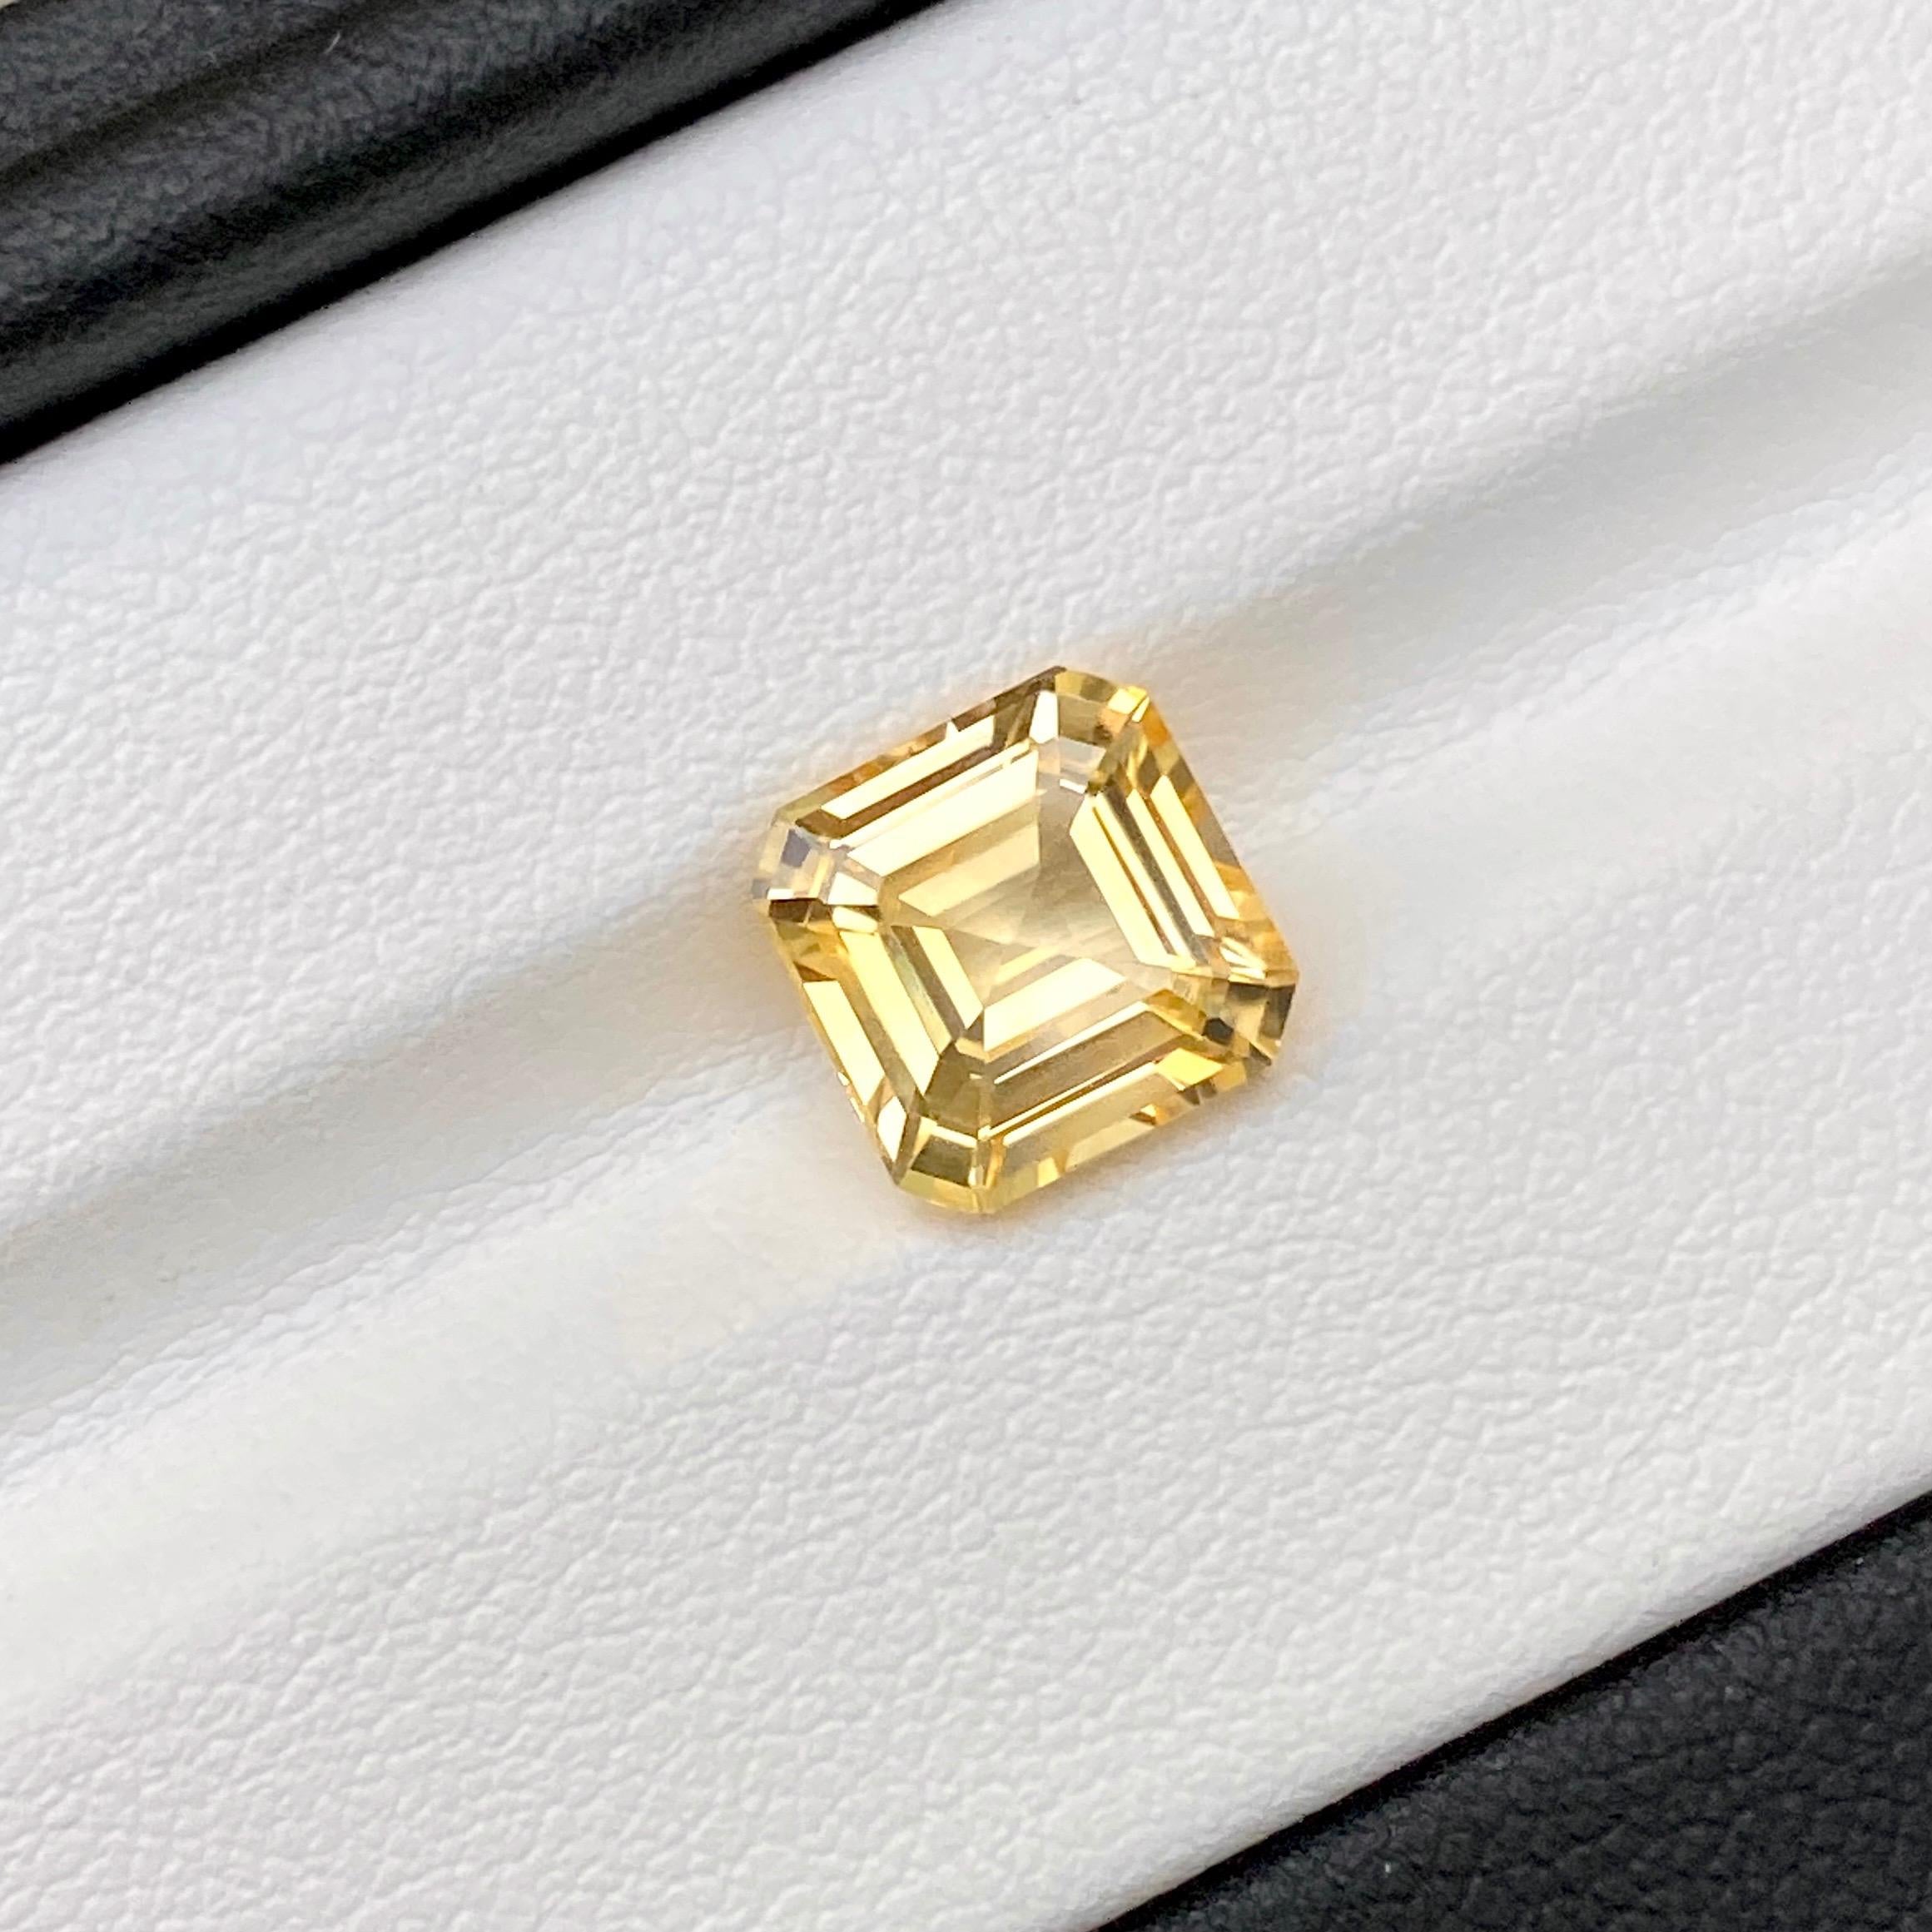 Sunlit facets gleam from this square cut yellow sapphire expressing an unbelievable golden saturation of yellow. Our talented cutter in Sri Lanka has fashioned this natural unheated sapphire into an impressive 3.5 carat that would inspire a smashing